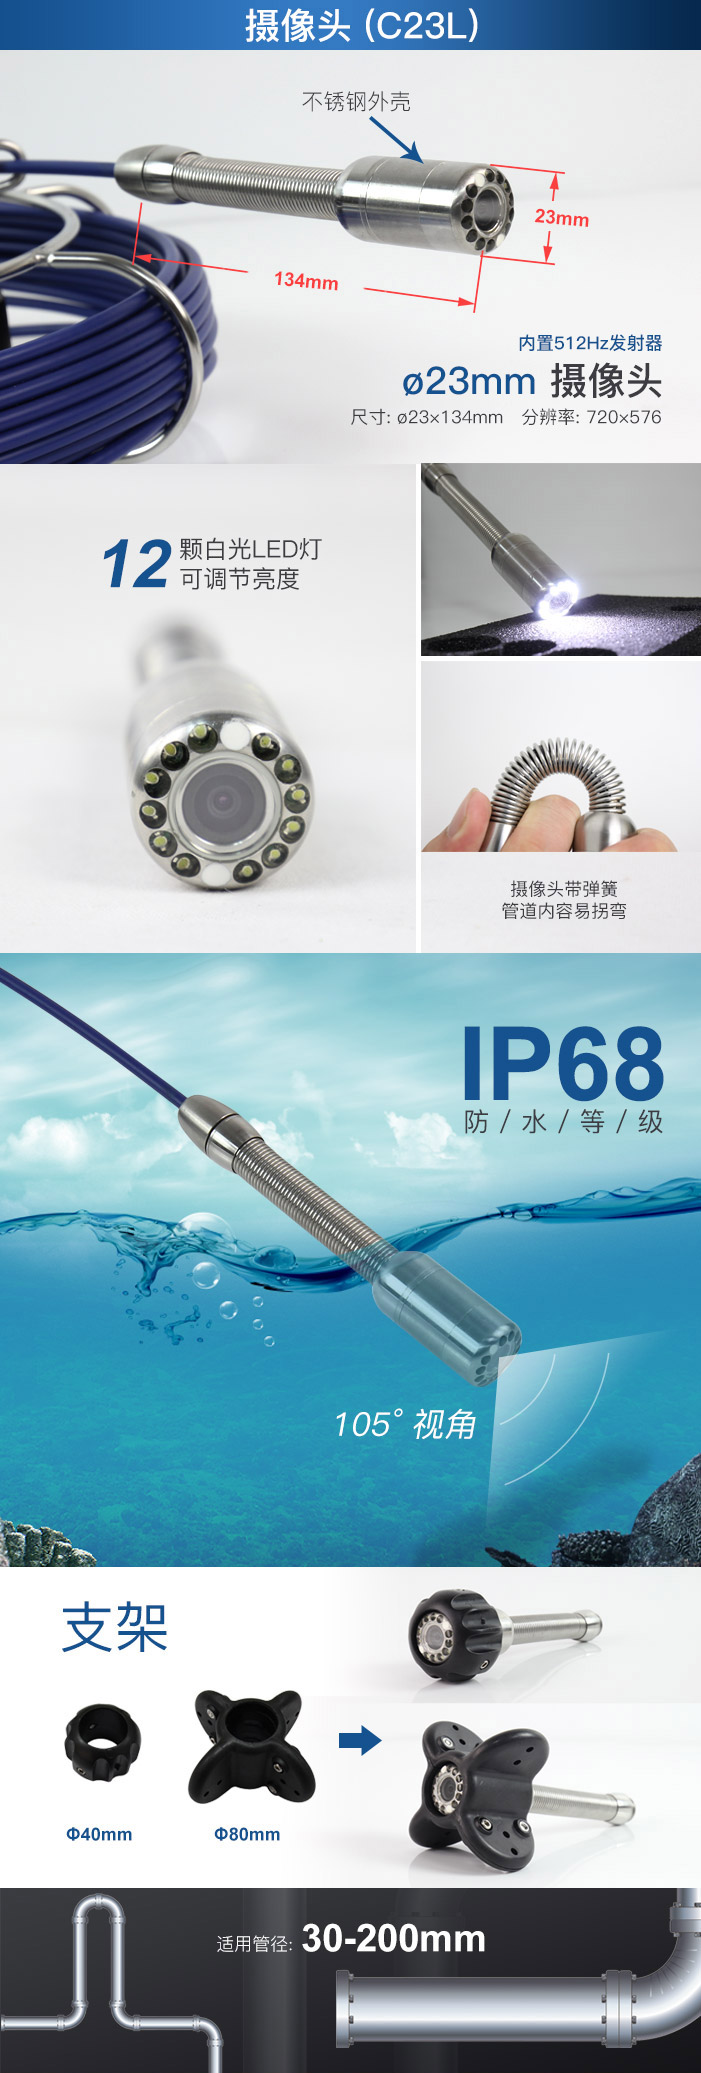 Water well inspection camera, Zhimin hardware, electromechanical, home leak detection pipeline inspection